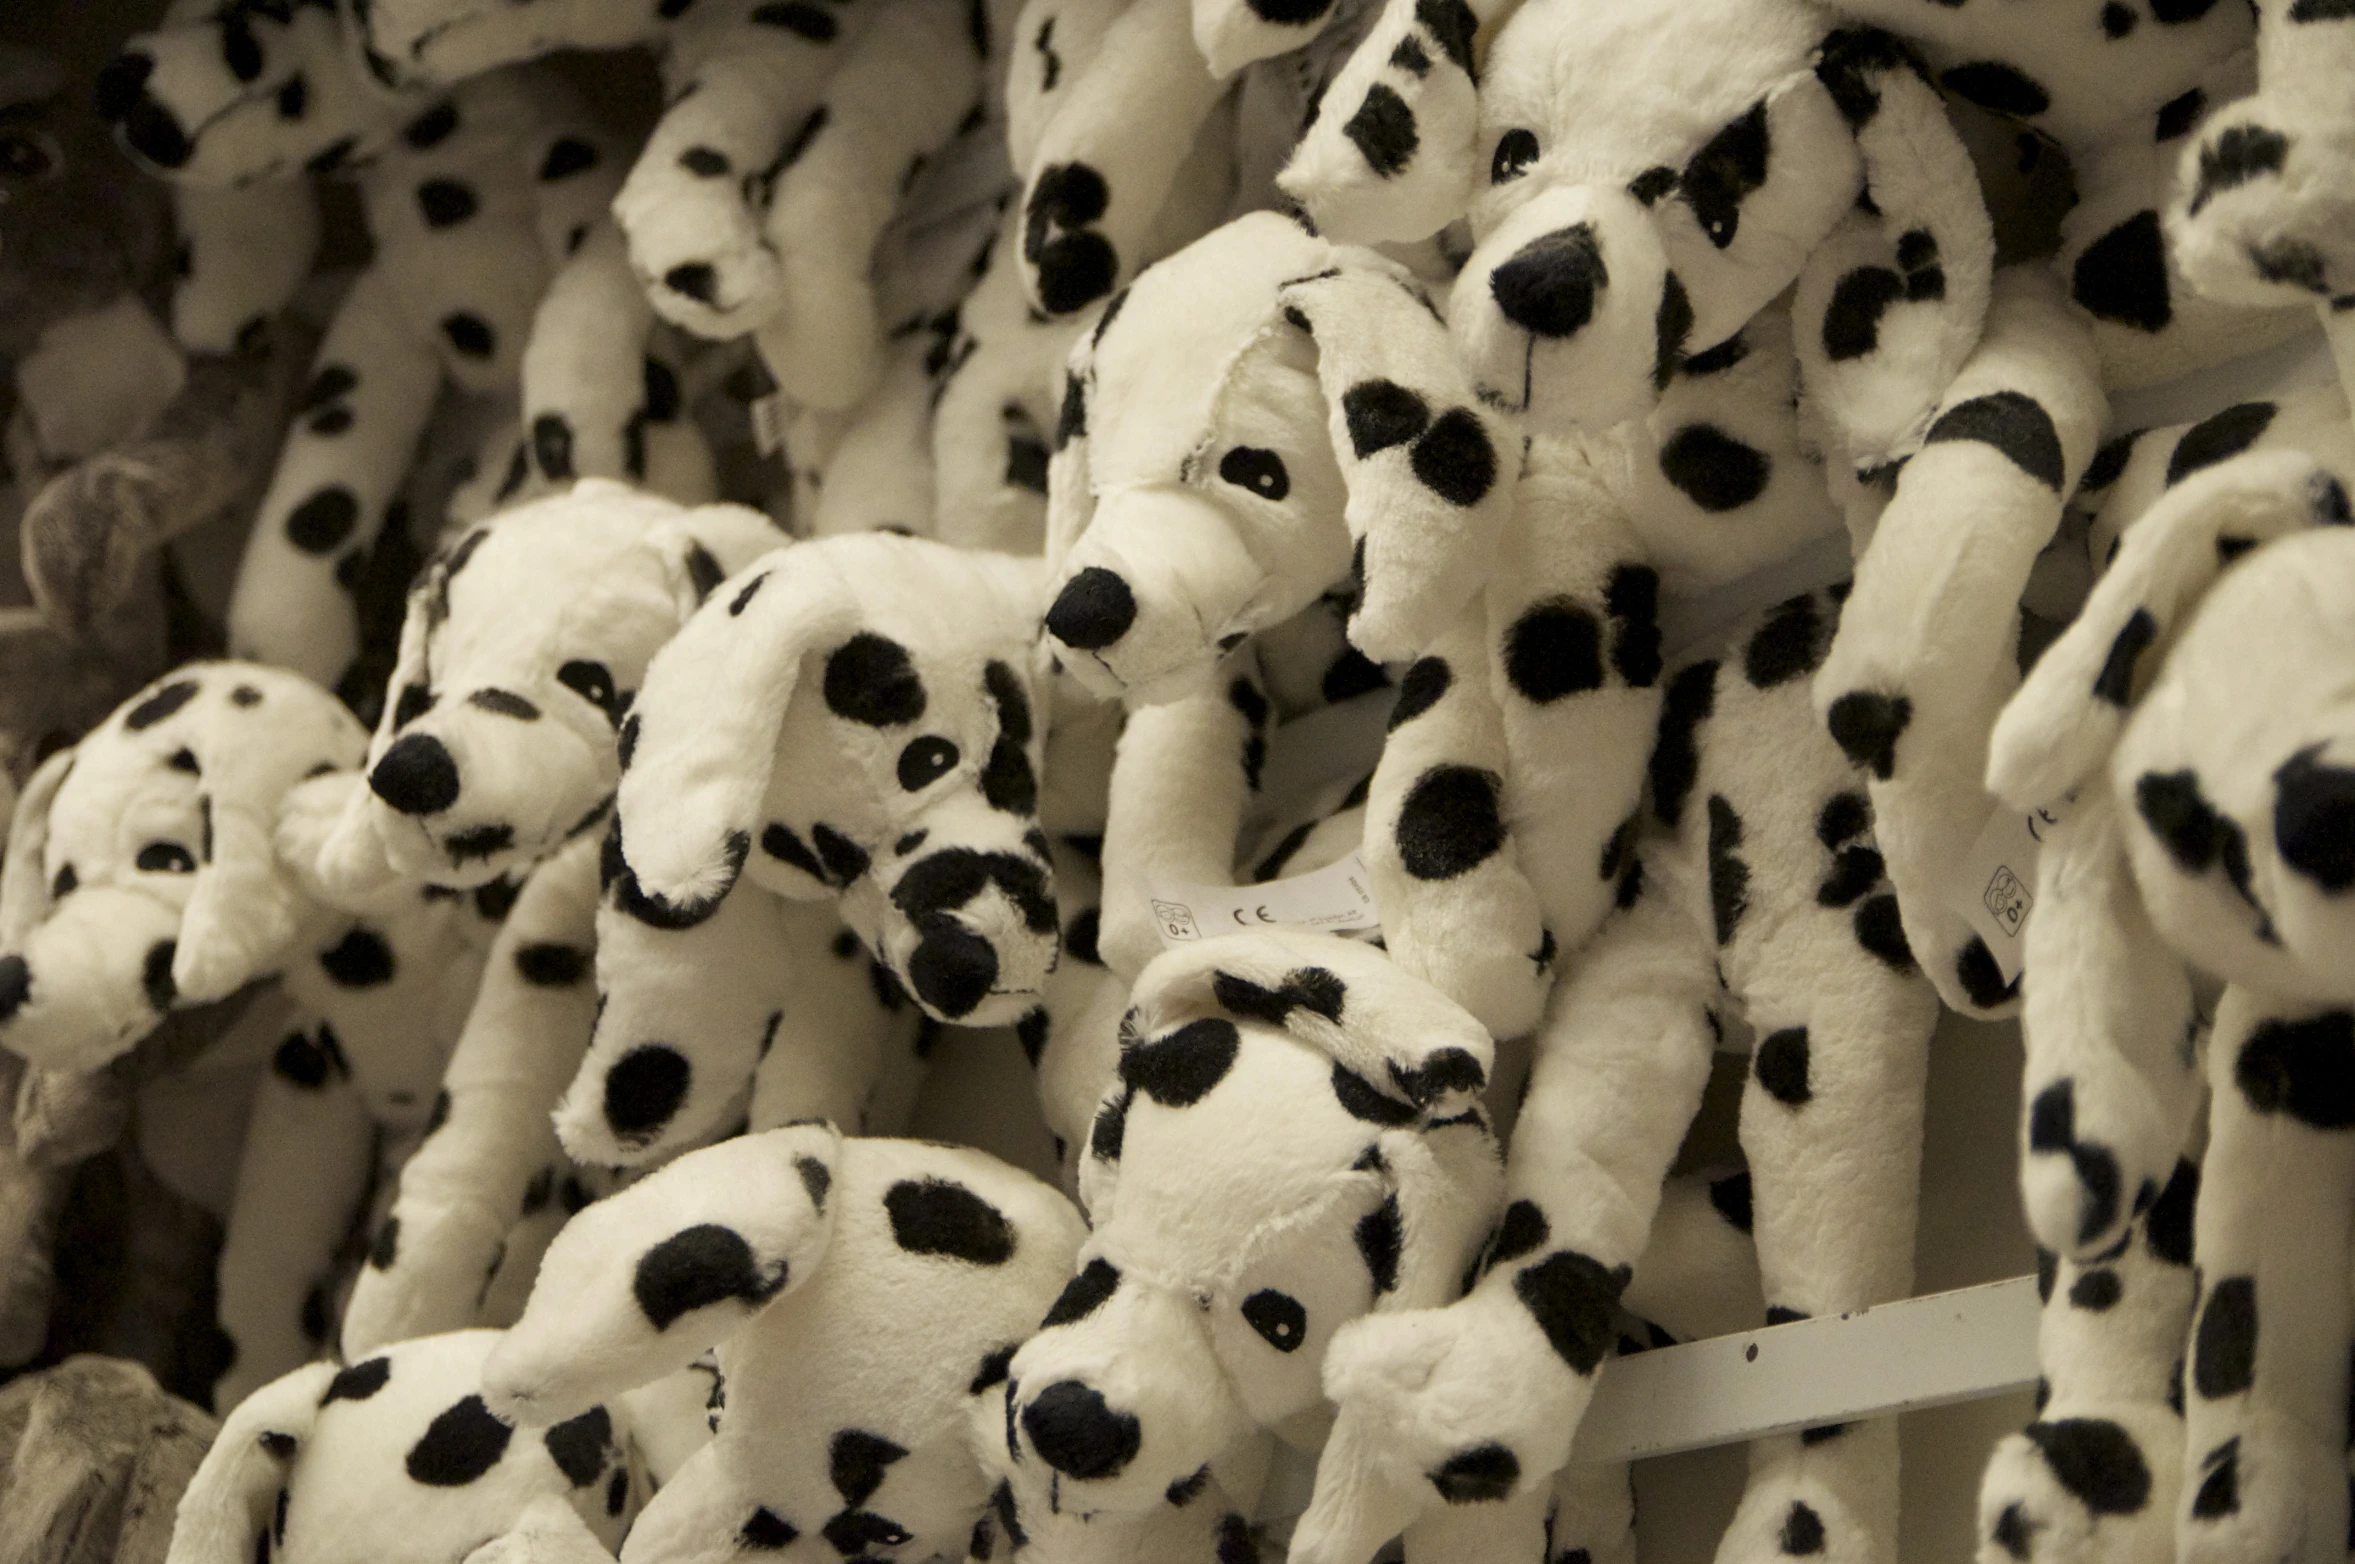 a pile of dalmatian stuffed animals sitting on top of each other